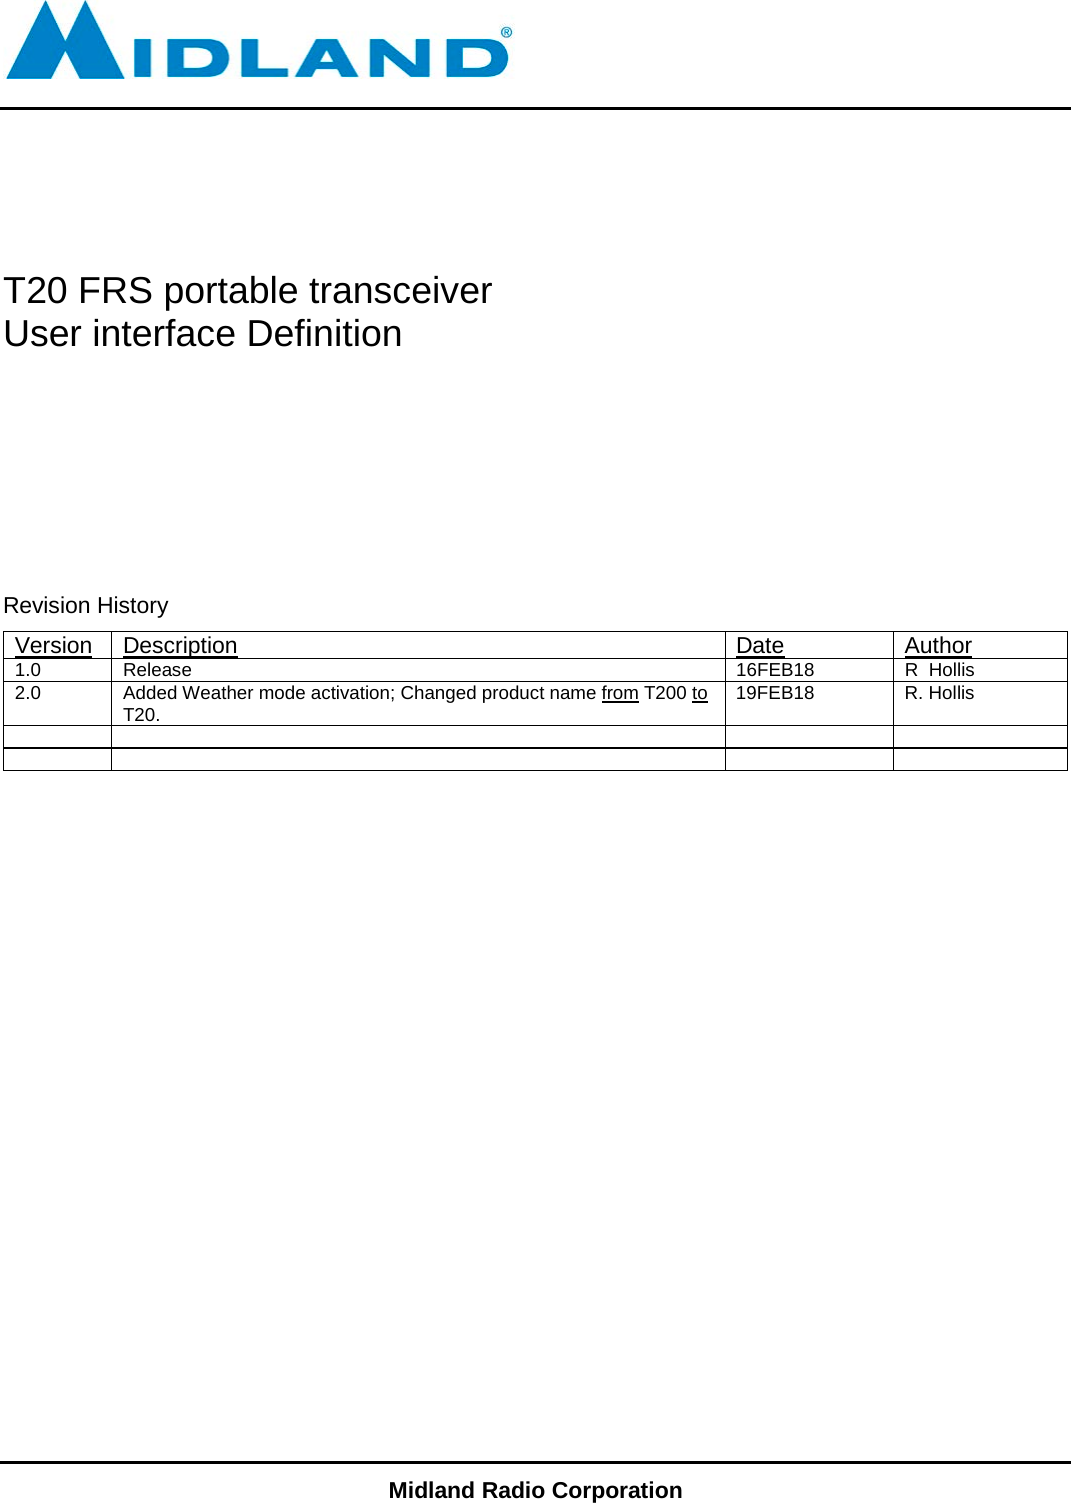       Midland Radio Corporation     T20 FRS portable transceiver User interface Definition          Revision History Version Description Date Author 1.0 Release 16FEB18 R  Hollis 2.0 Added Weather mode activation; Changed product name from T200 to T20. 19FEB18  R. Hollis                        